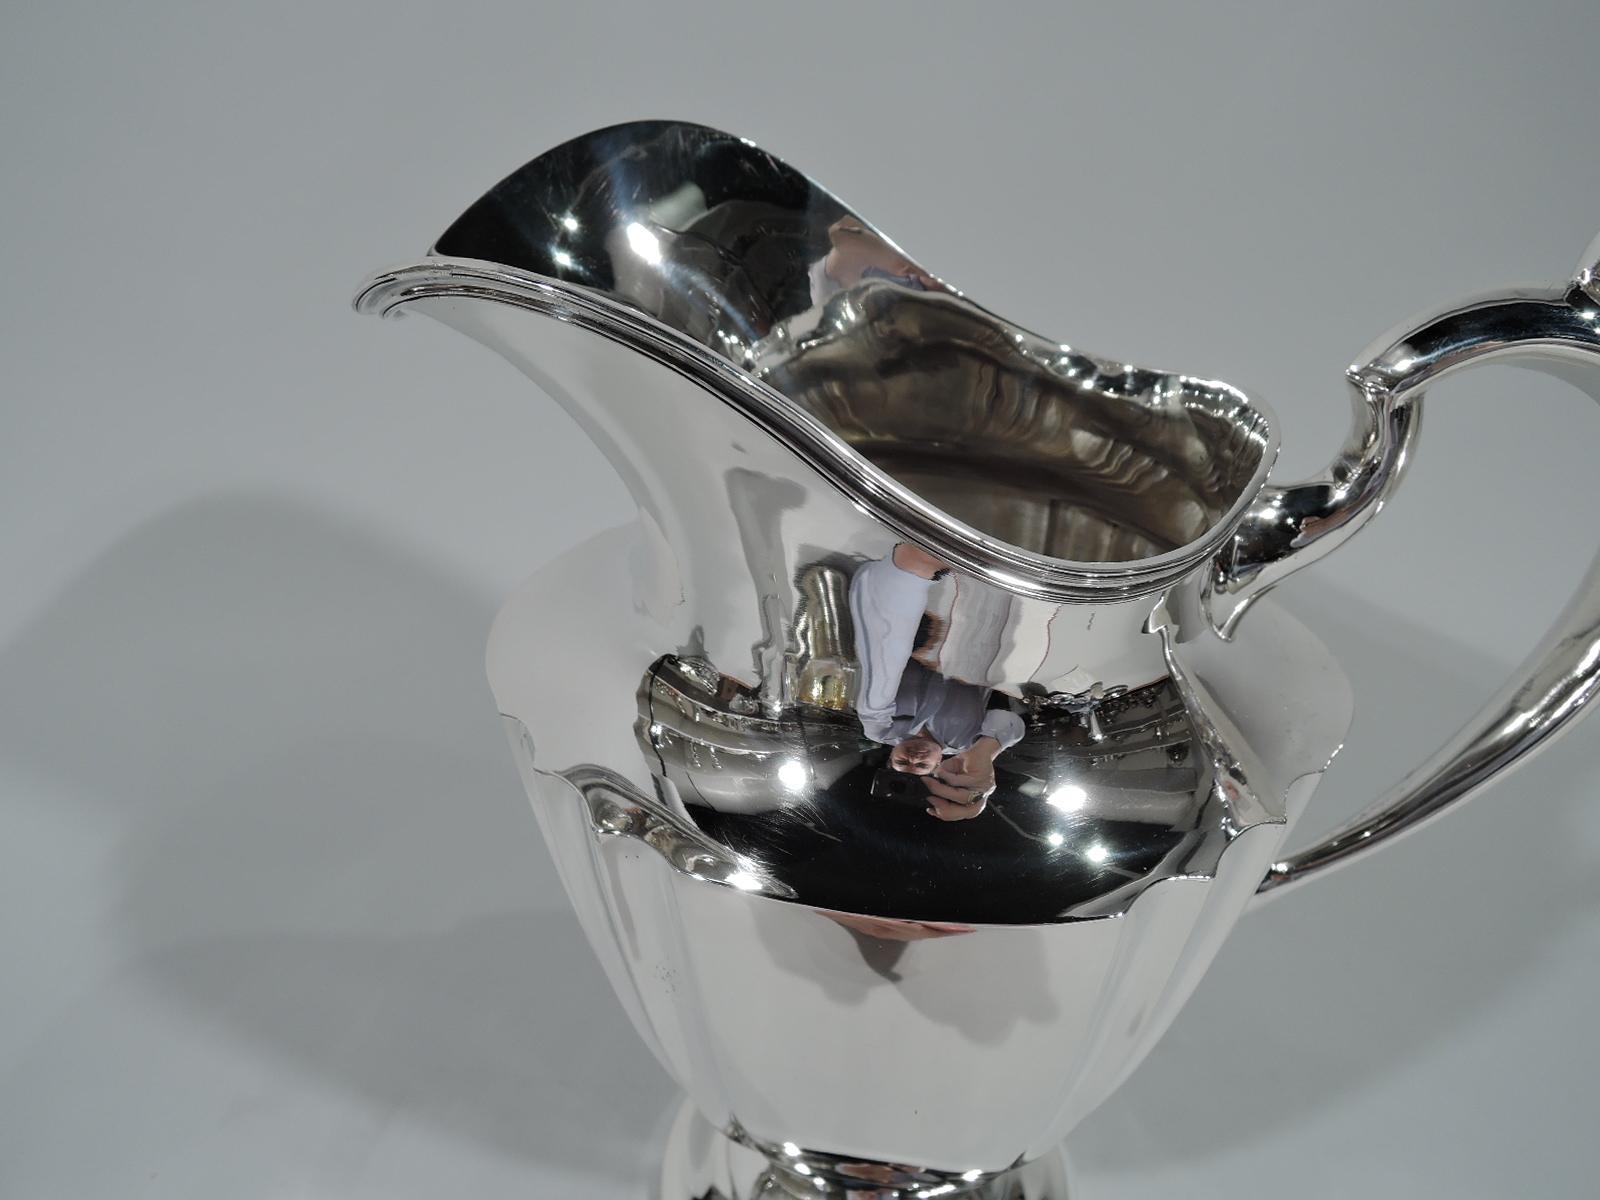 American Art Deco sterling silver water pitcher, circa 1925. Ovoid and tapering body with 4 clusters of fluting. Capped high-looping handle, helmet mouth with reeded rim, and stepped domed foot. Hallmarked “Sterling 0911”. Weight: 21.4 troy ounces.